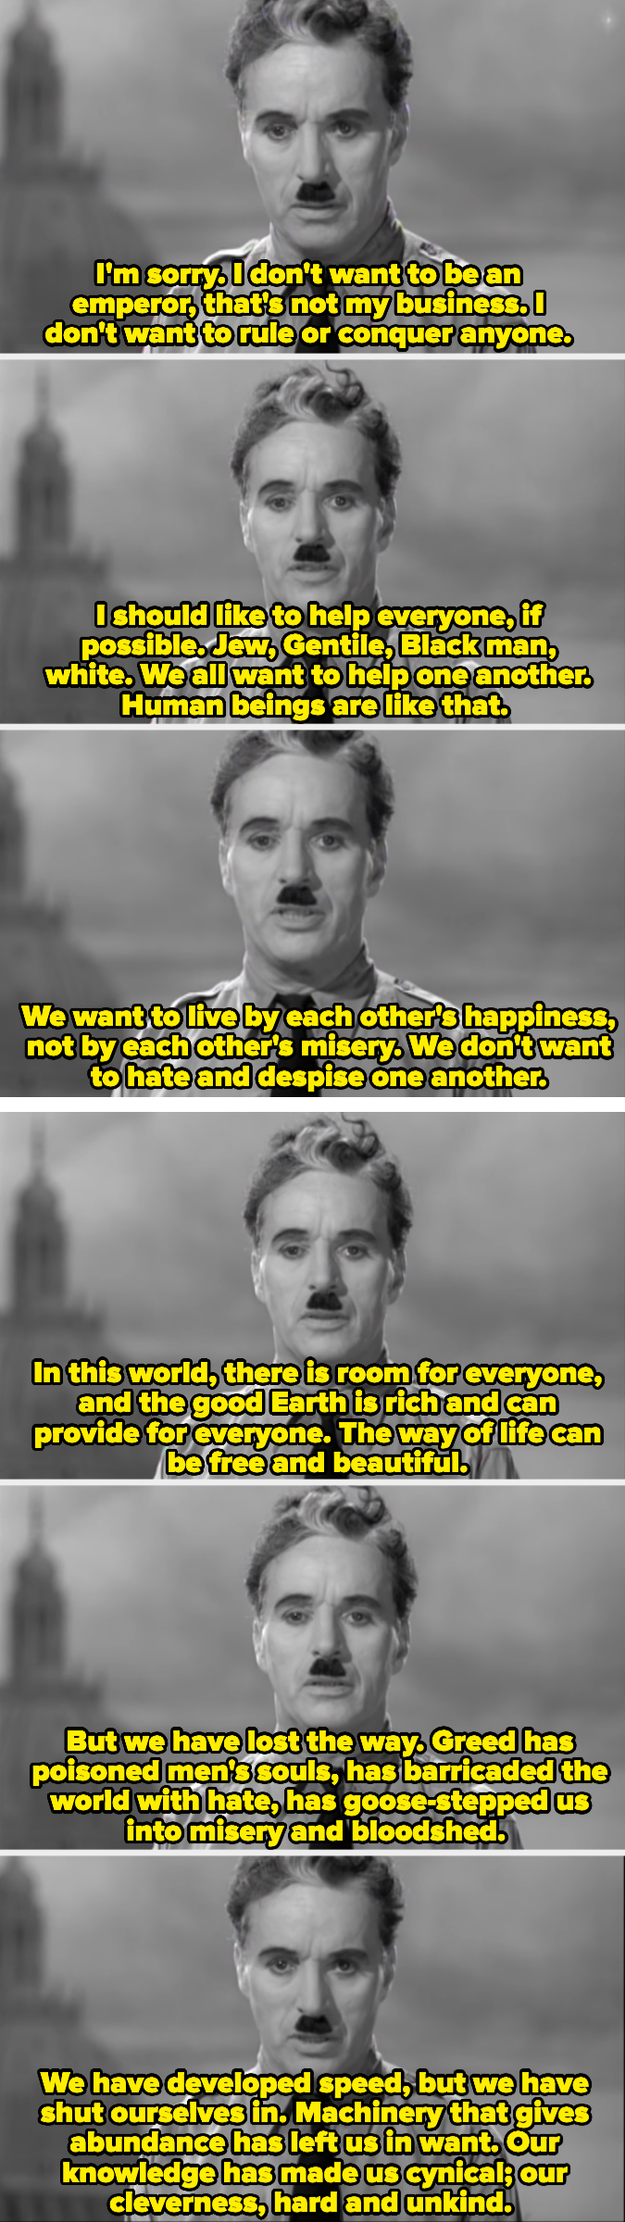 Screenshots from &quot;The Great Dictator&quot;